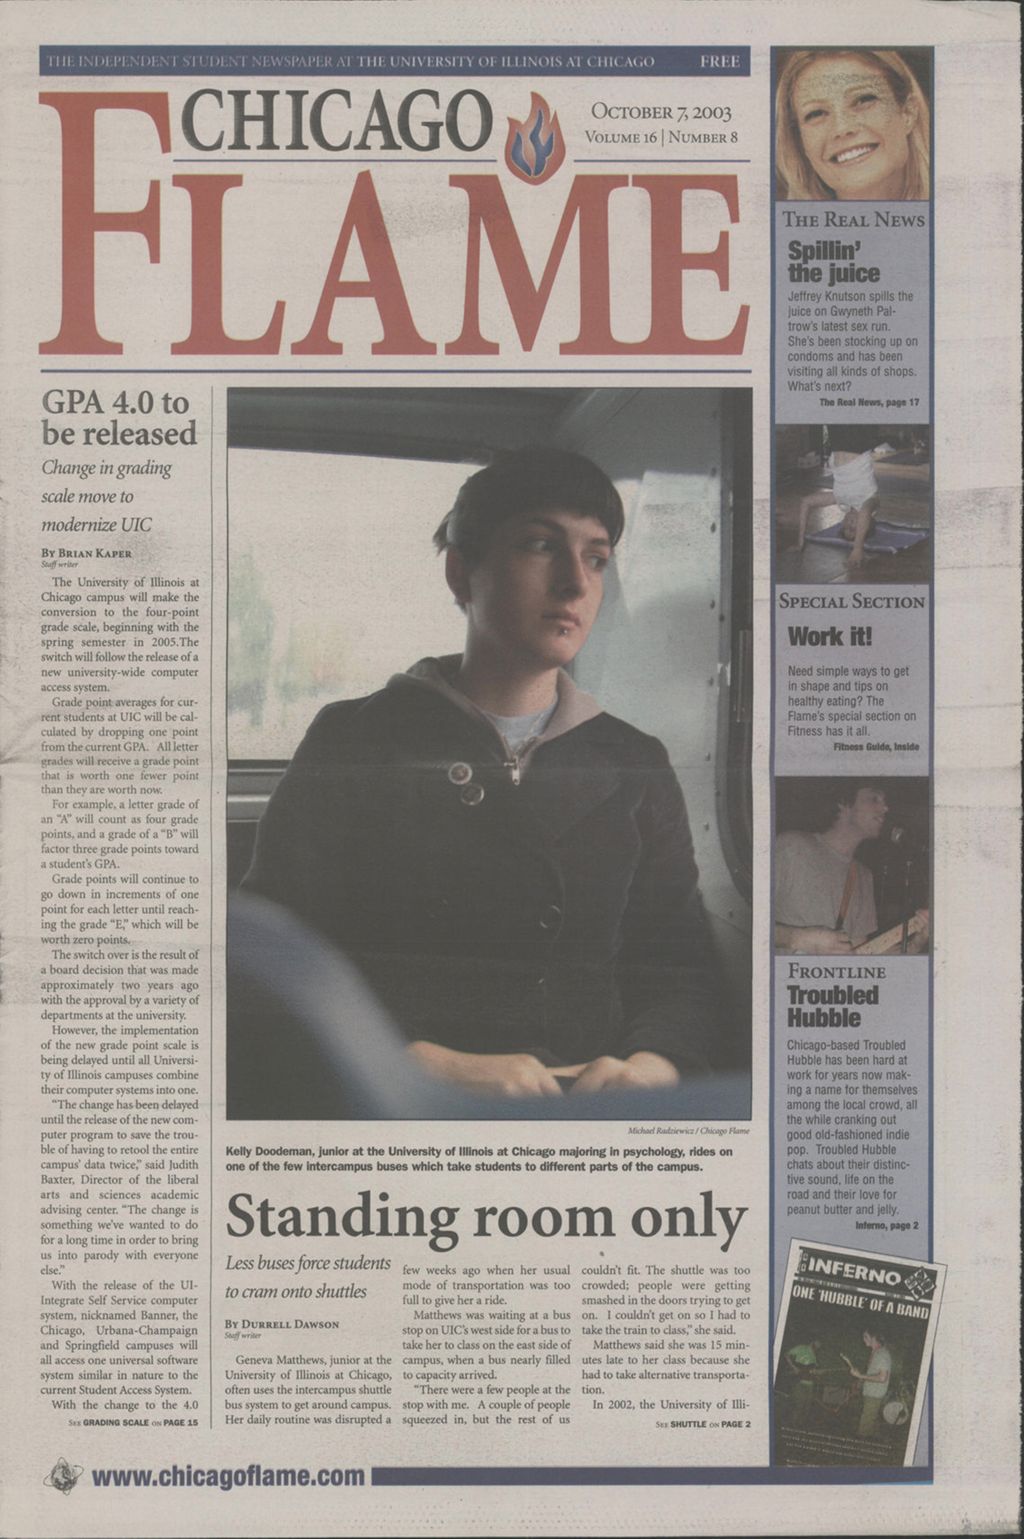 Miniature of Chicago Flame (October 7, 2003)